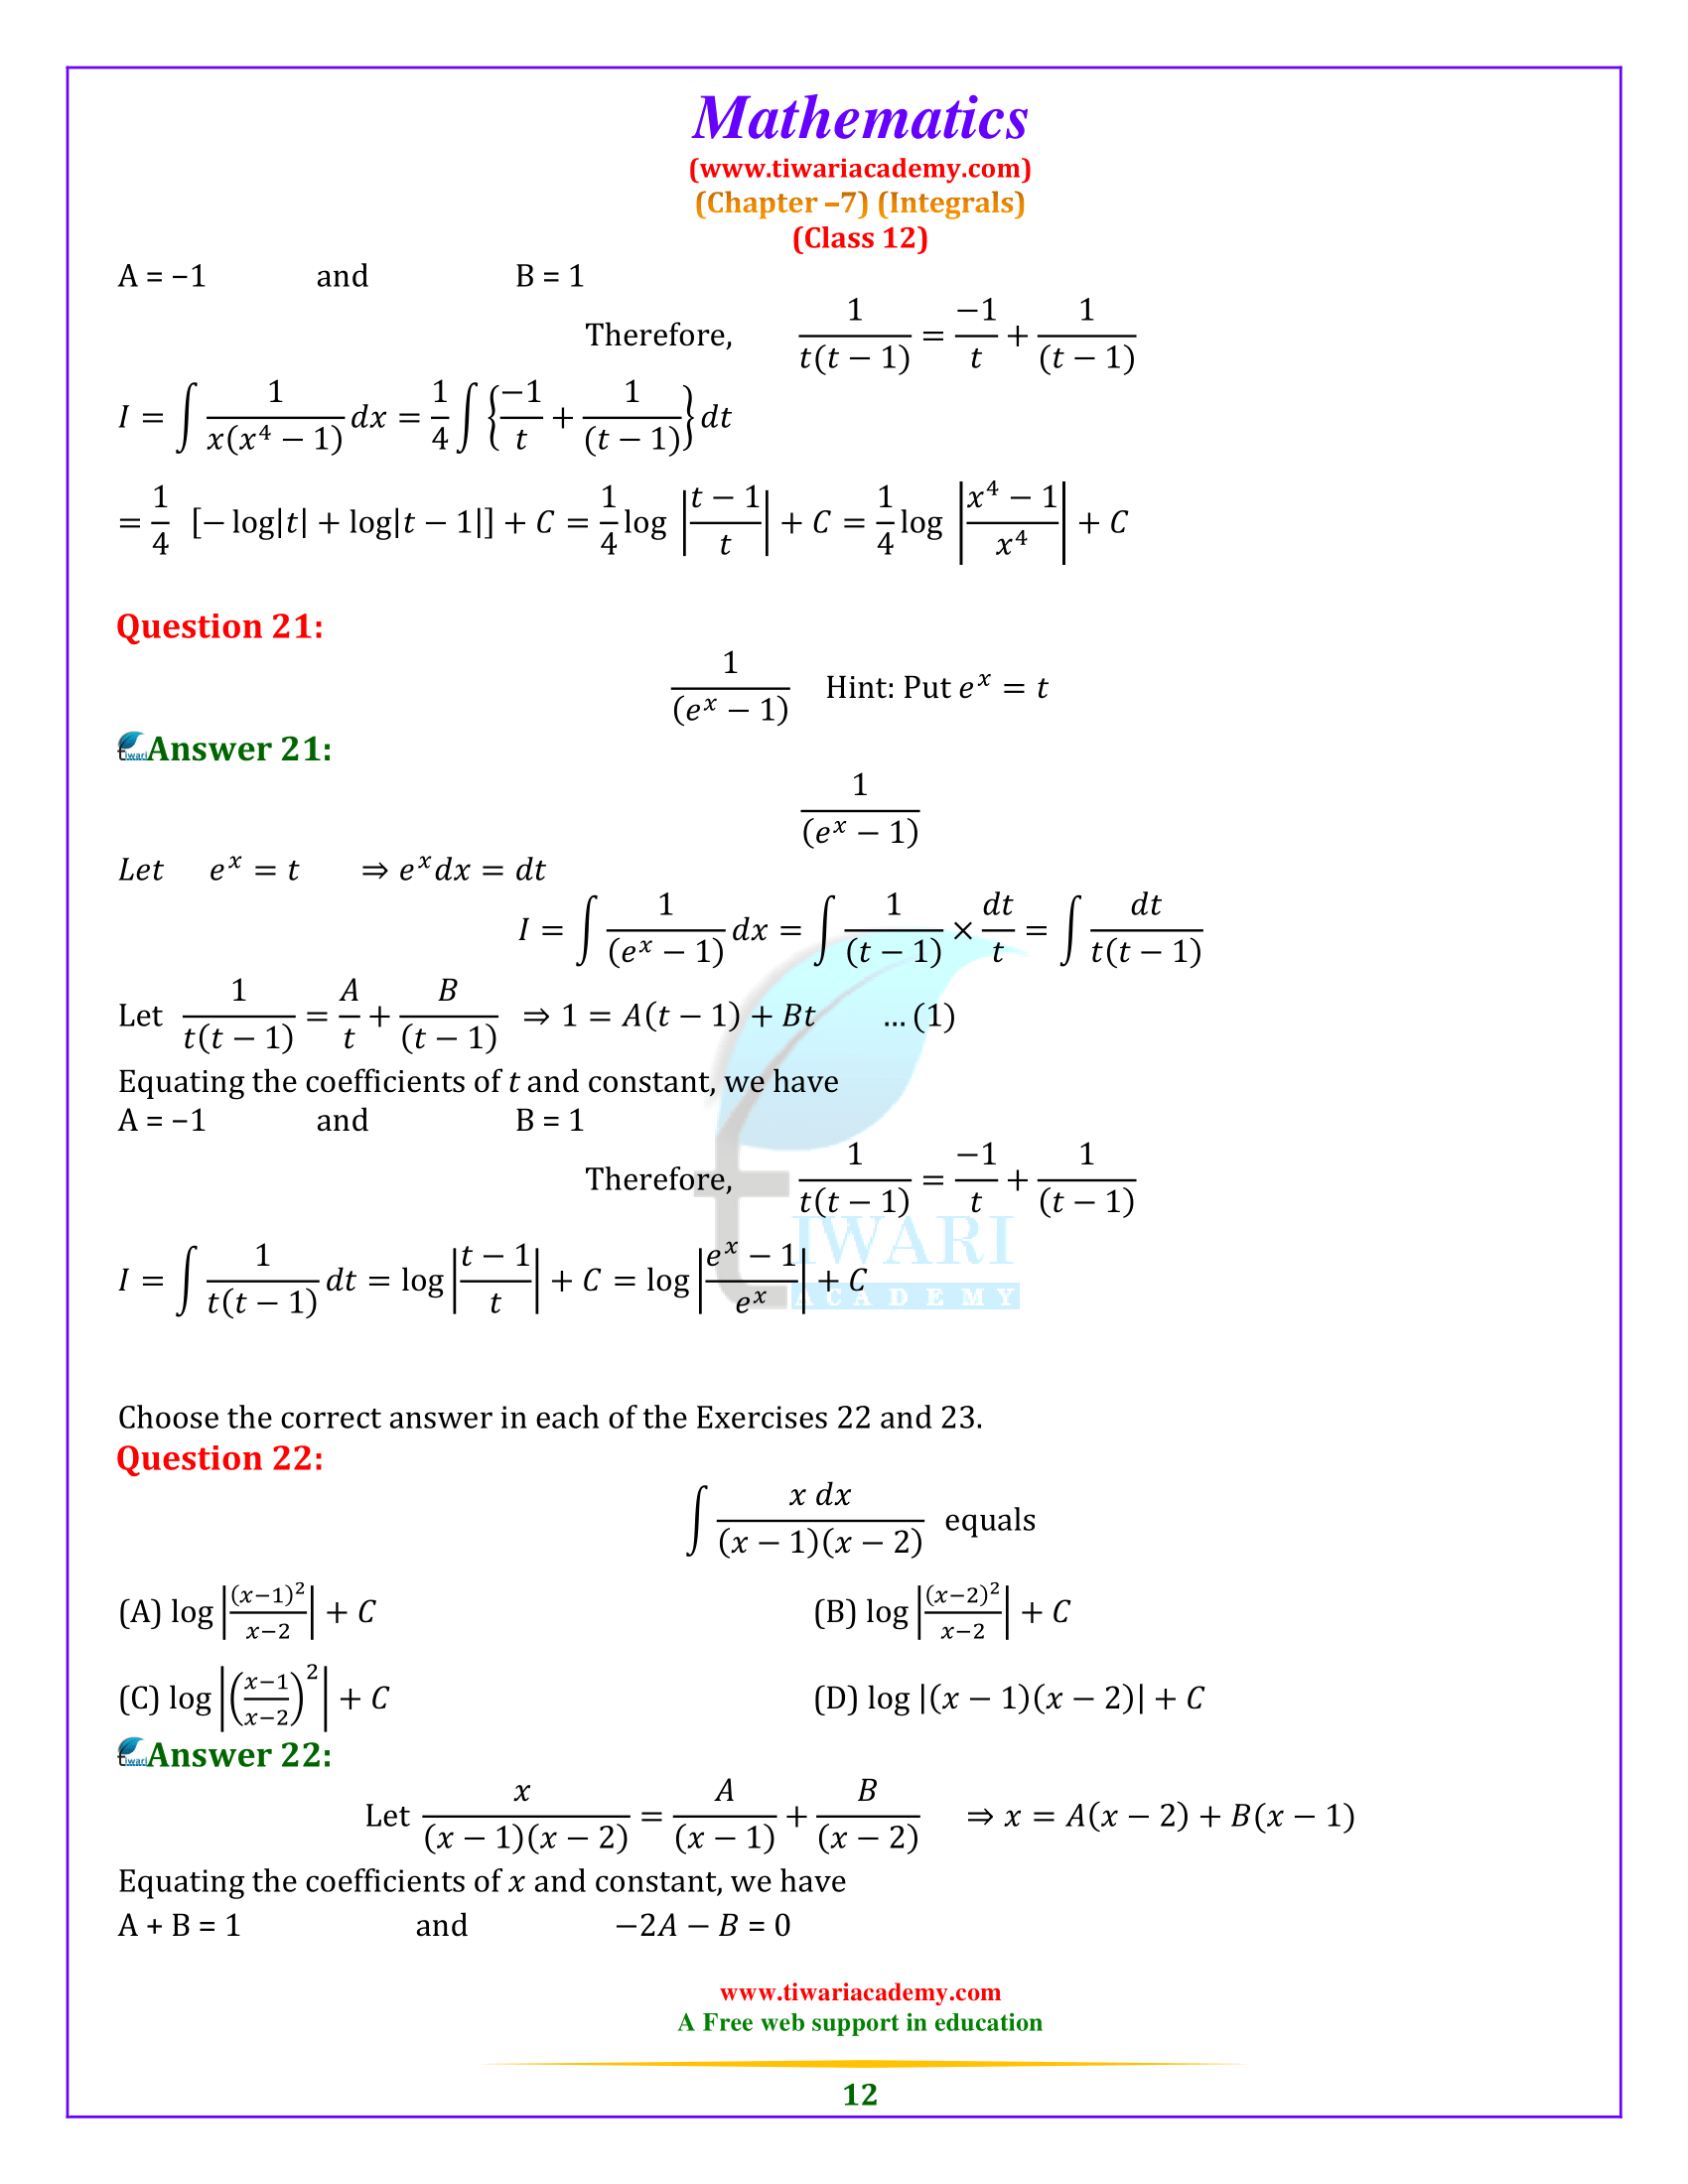 12 Maths Exercise 7.5 solutions